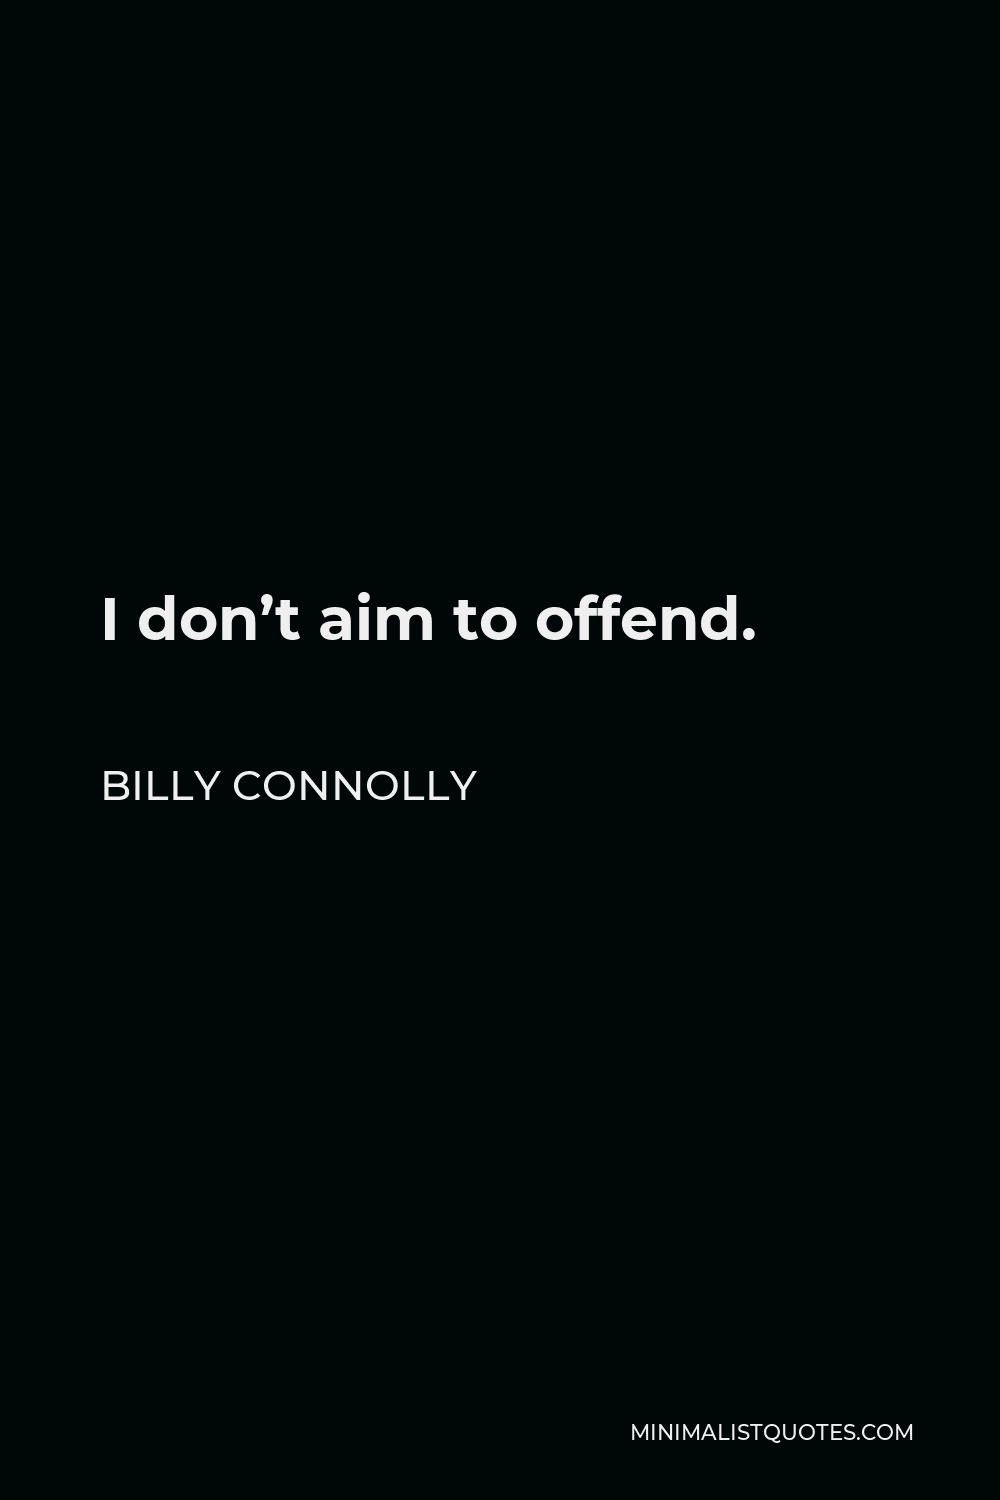 Billy Connolly Quote - I don’t aim to offend.